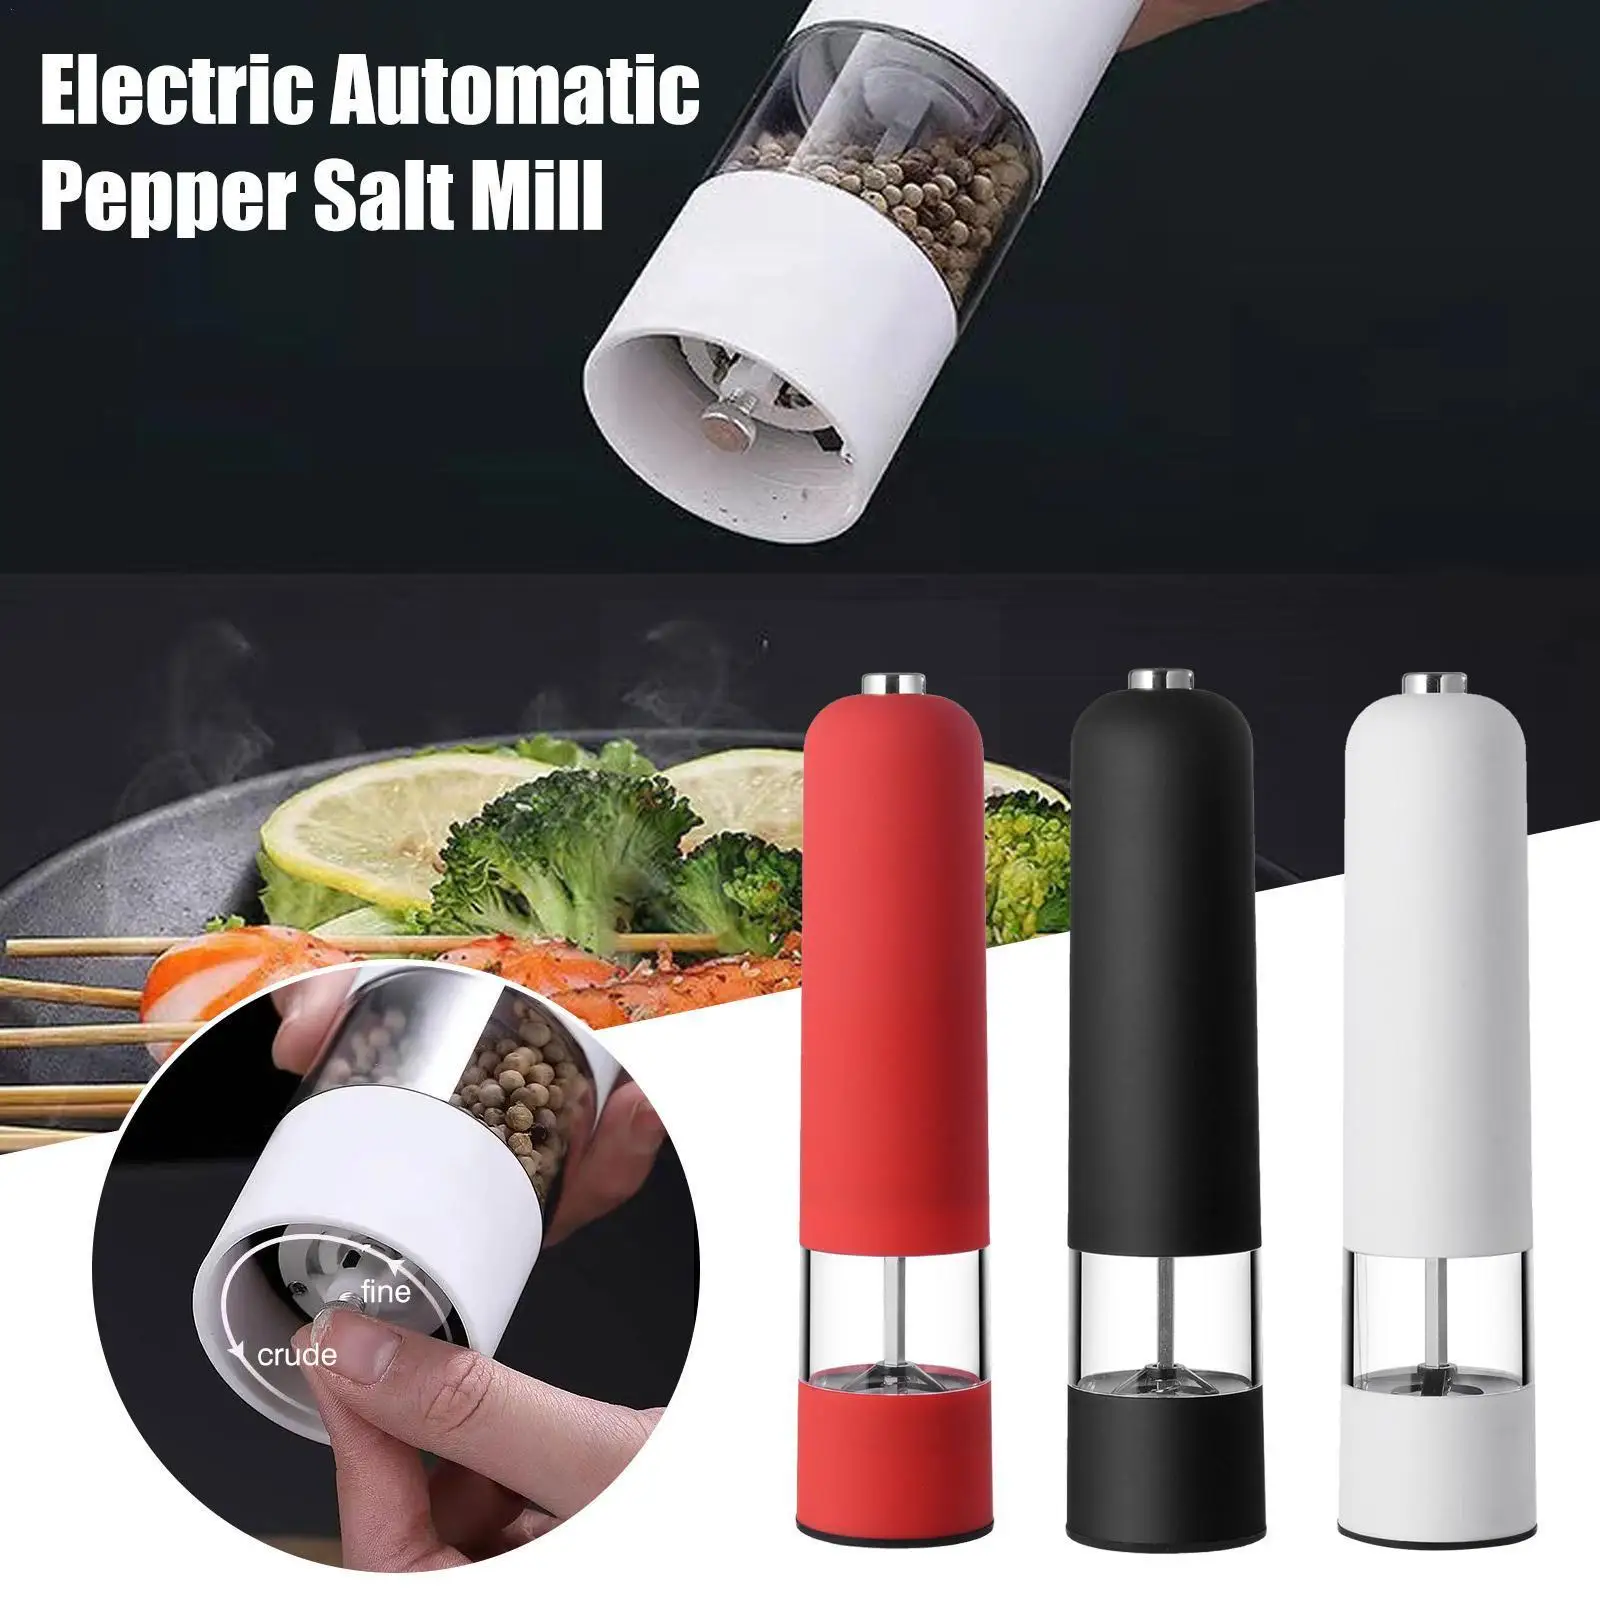 

Electric Automatic Pepper Salt Mill Spice Grinder For Cooking Restaurants Kitchen Accessories Seasoning Bottle Tool Q4j8